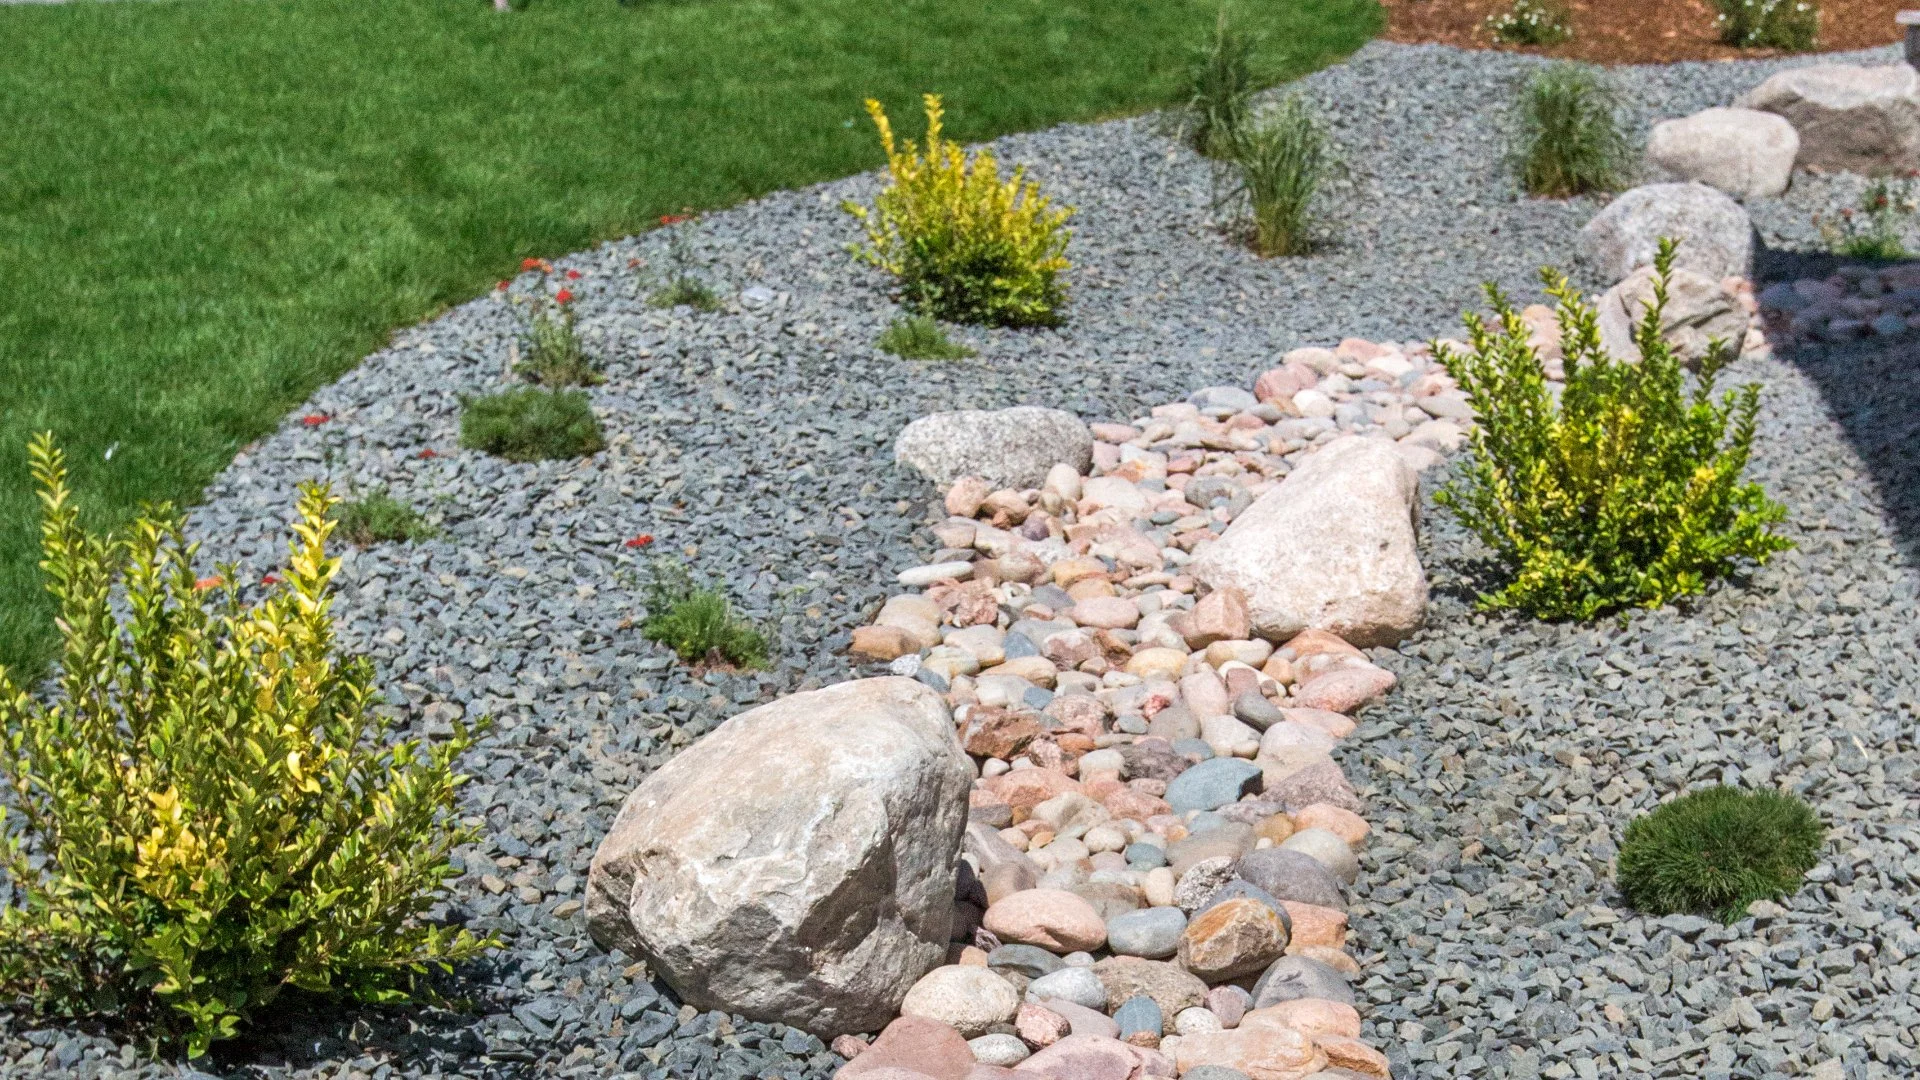 French Drains vs Dry Creek Beds - Which Option Is the Better Choice?